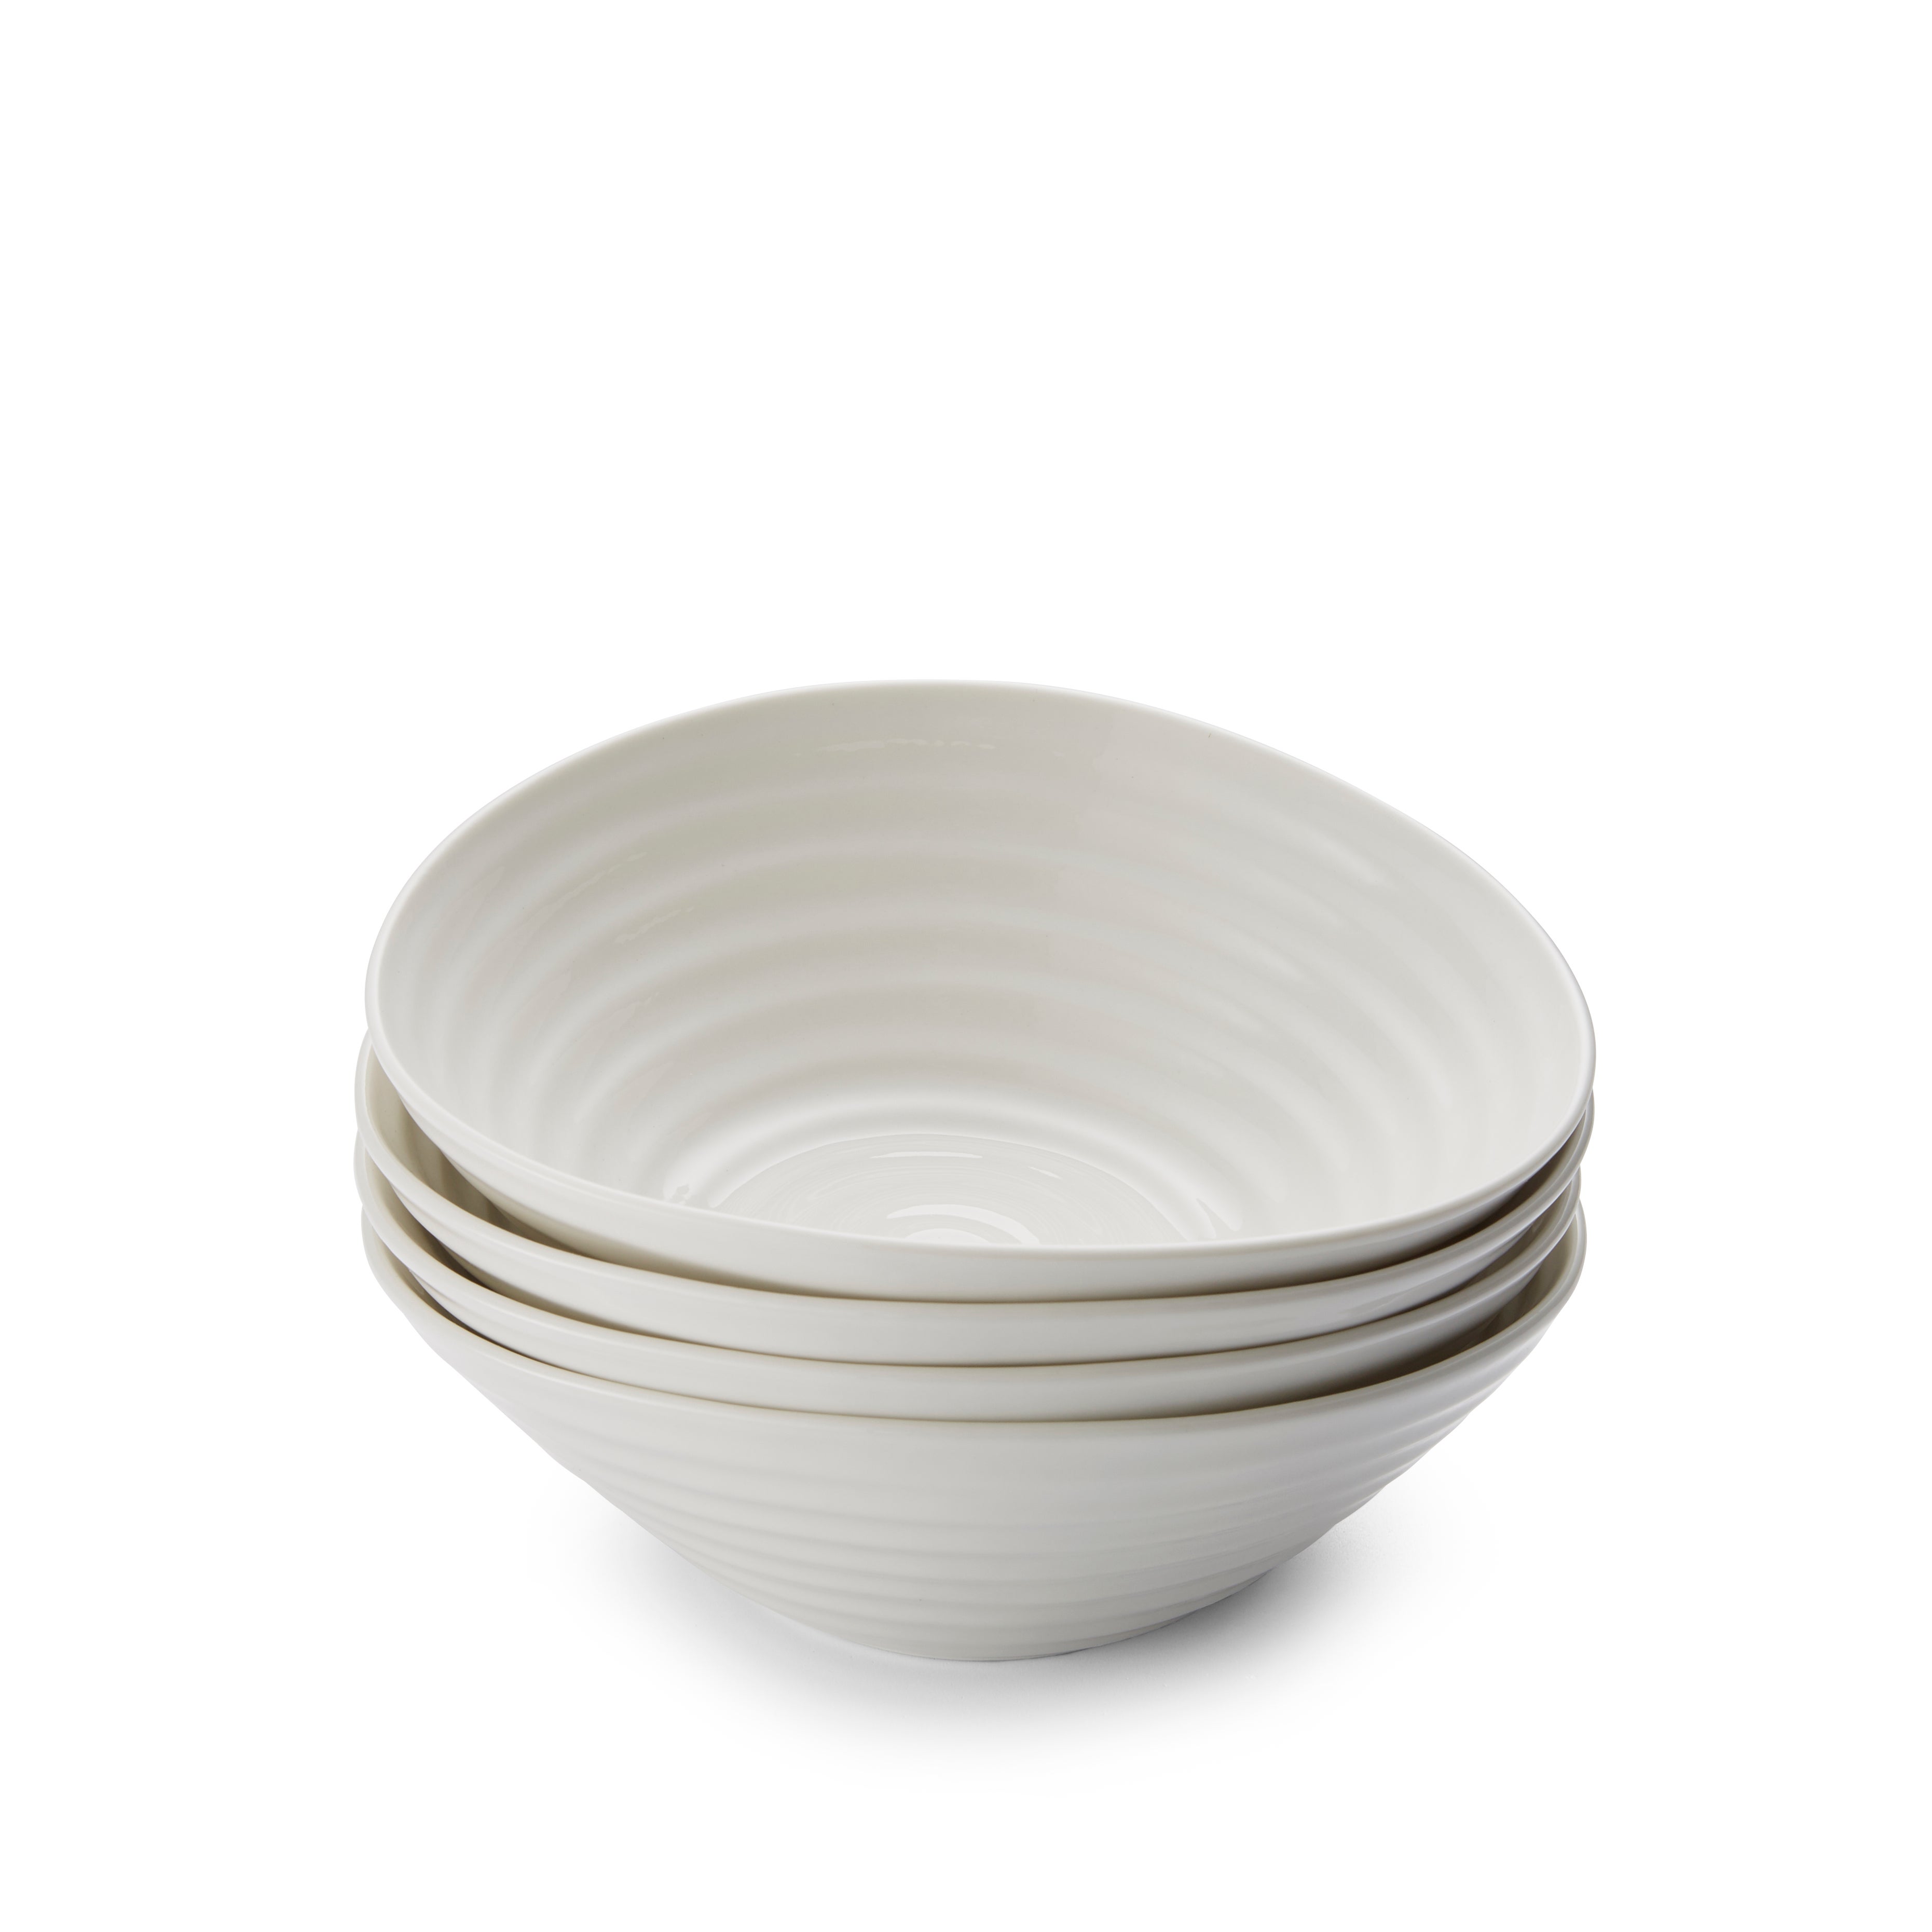 Photos - Plate Set of 4 Sophie Conran for Cereal Bowls White